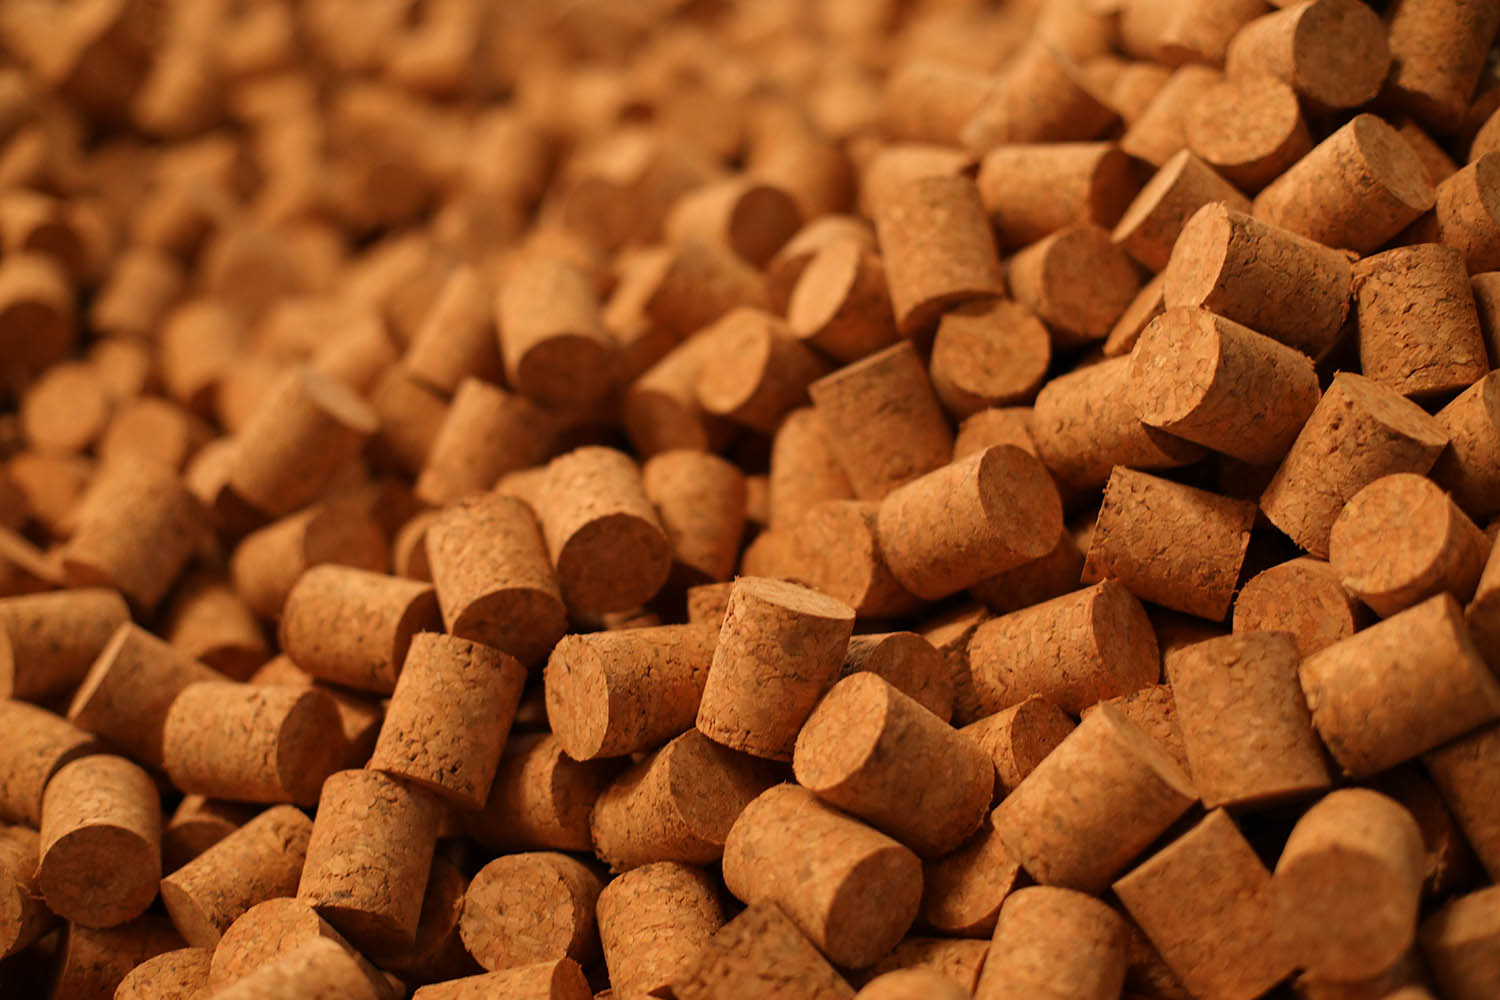 Agglomerated cork stoppers